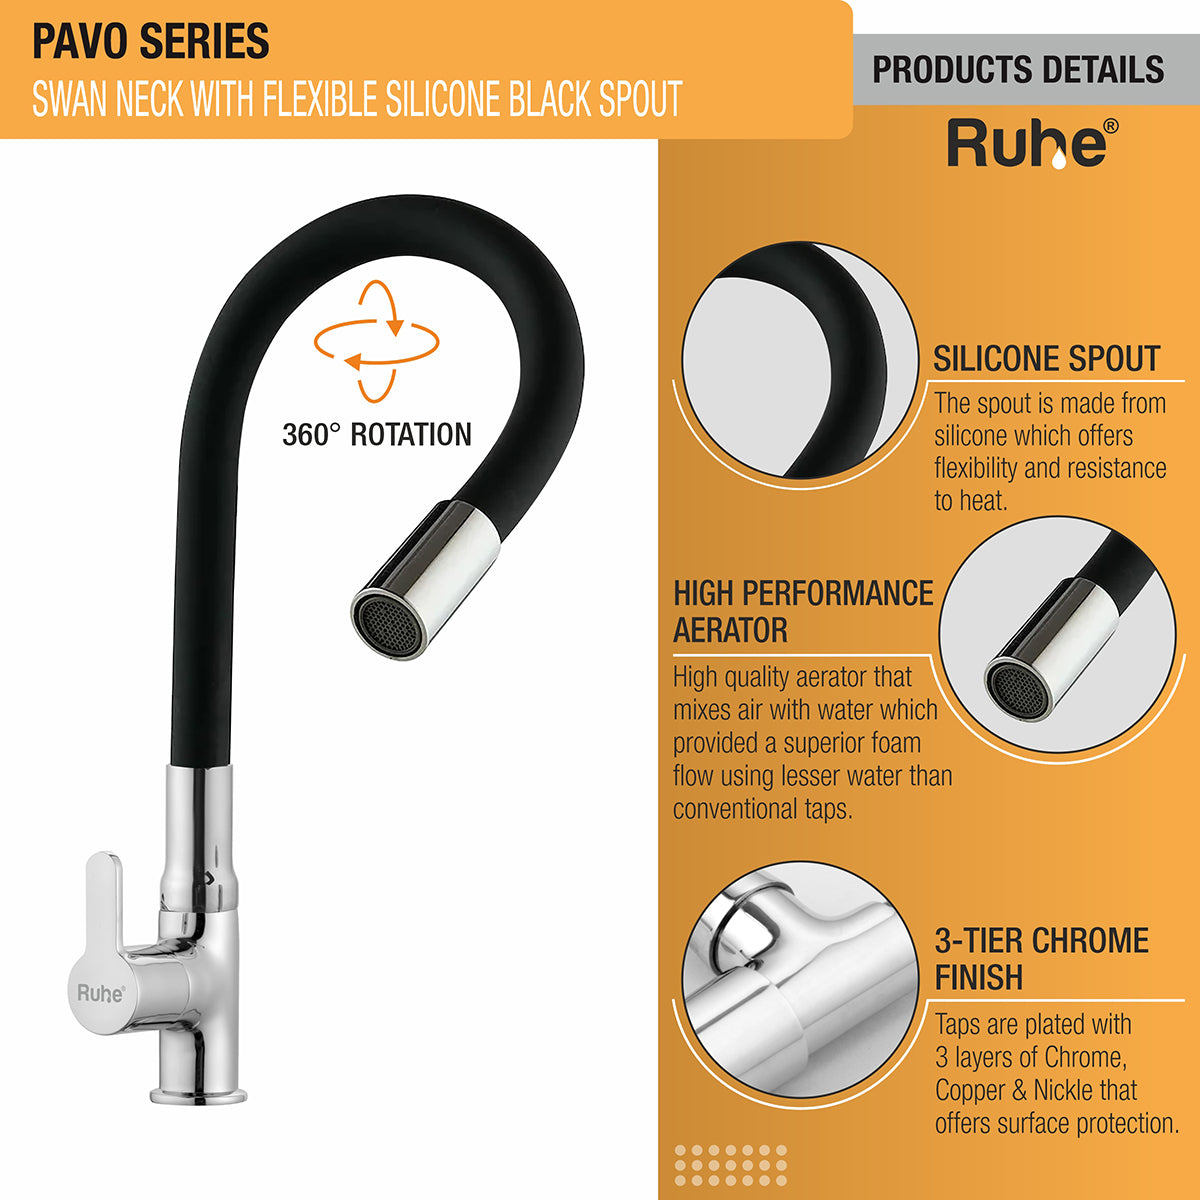 Pavo Swan Neck Brass Faucet with Silicone Black Flexible Spout products details like Silicone spout, high performance aerator, 3 chrome plated layers